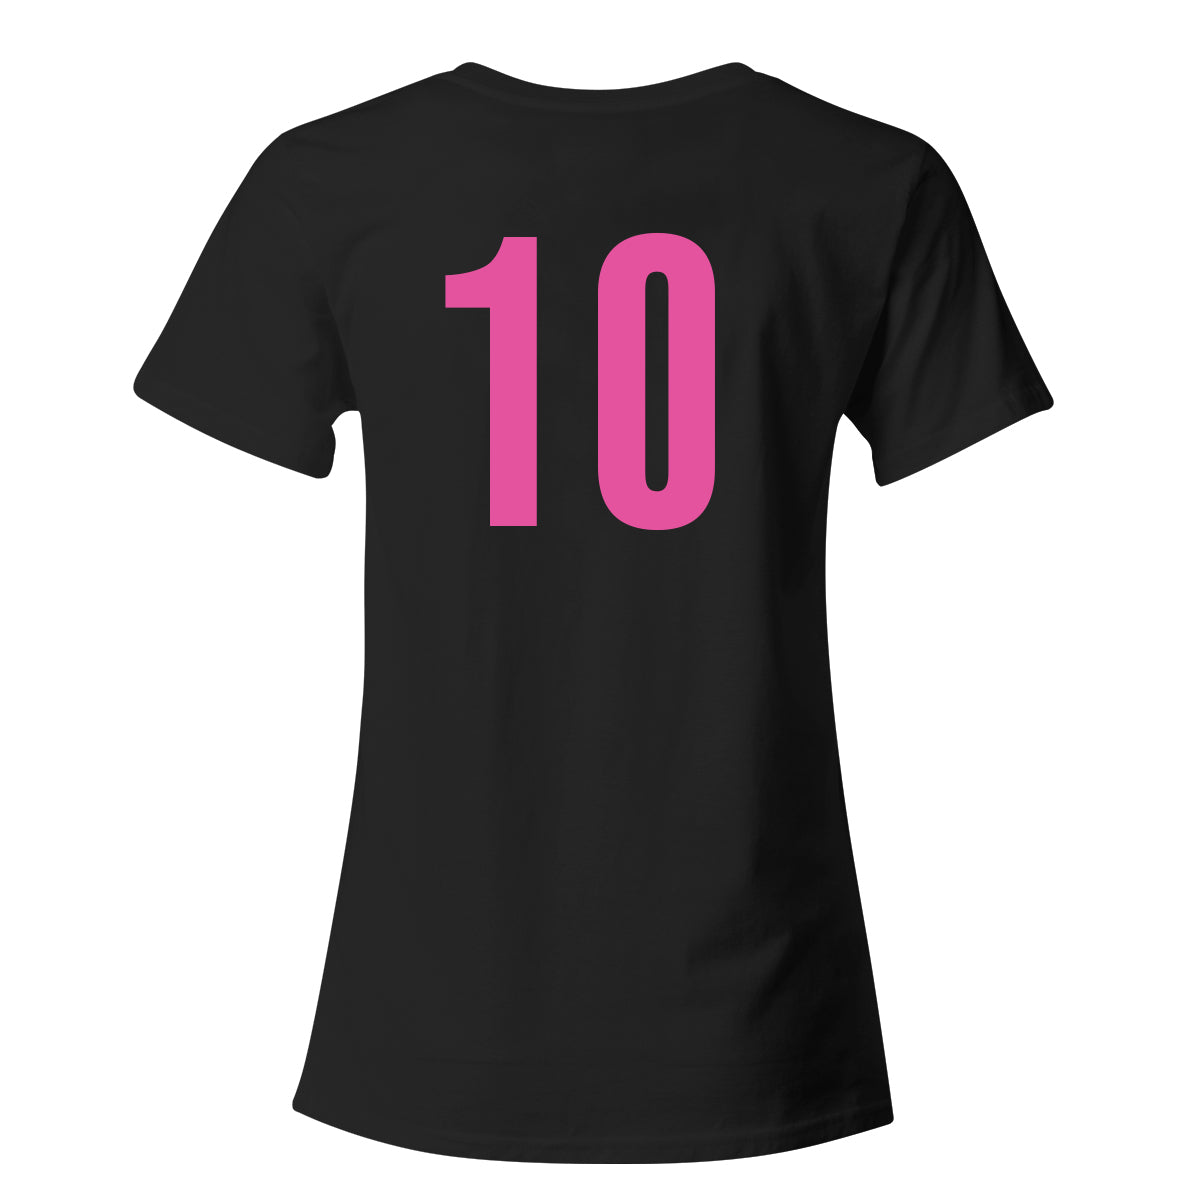 Soccer Ball Personalized Name and Number Black Short Sleeve Tee Shirt - Wimziy&Co.